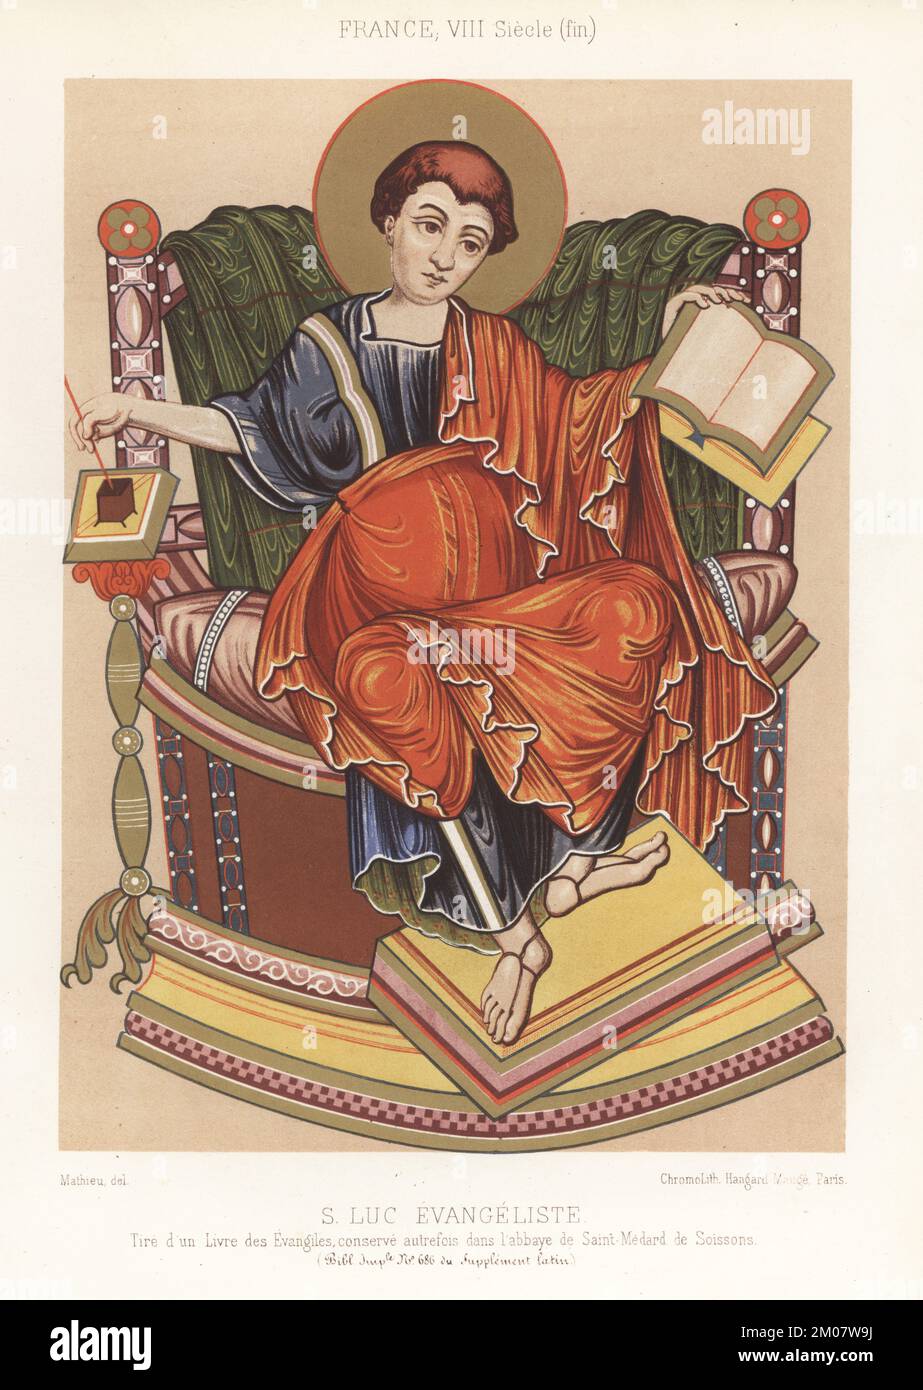 Luke the Evangelist, one of the four authors of the gospels, c.9-93 AD. Seated on a chair, right hand dipping a quill pen in an inkwell and left hand holding a book. Wearing late 8th century French costume. S. Luc Evangeliste, France, VIIIe siecle (fin). Taken from a manuscript formerly kept at the Abbey of Saint-Medard de Soissons. MS 686 Sup. Latin, Bibliotheque Imperiale. Chromolithograph after Mathieu from Charles Louandre’s Les Arts Somptuaires, The Sumptuary Arts, Hangard-Mauge, Paris, 1858. Stock Photo